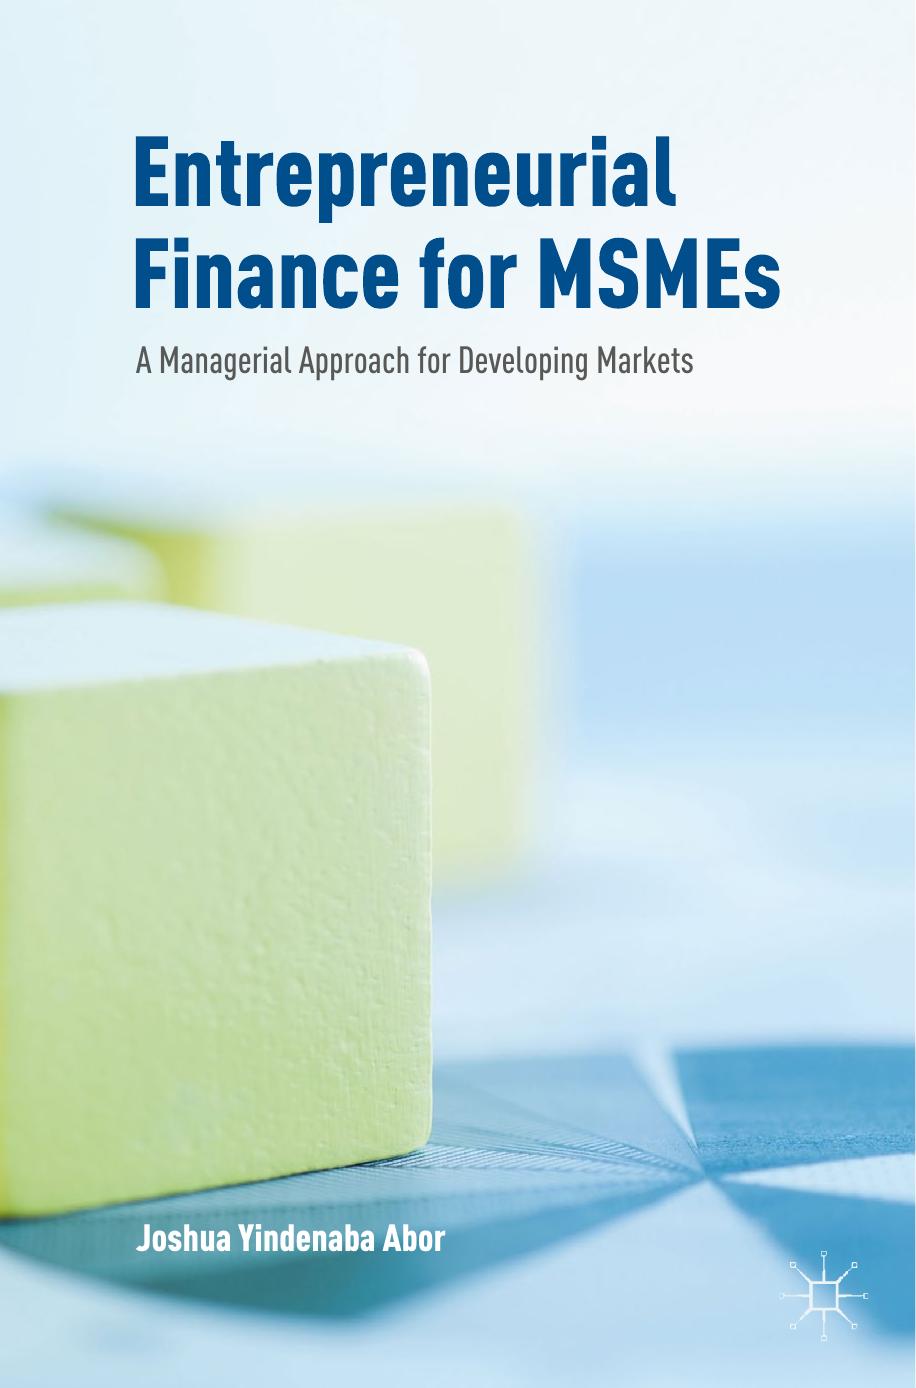 Entrepreneurial Finance for MSMEs A Managerial Approach for Developing Markets 2017 PDF